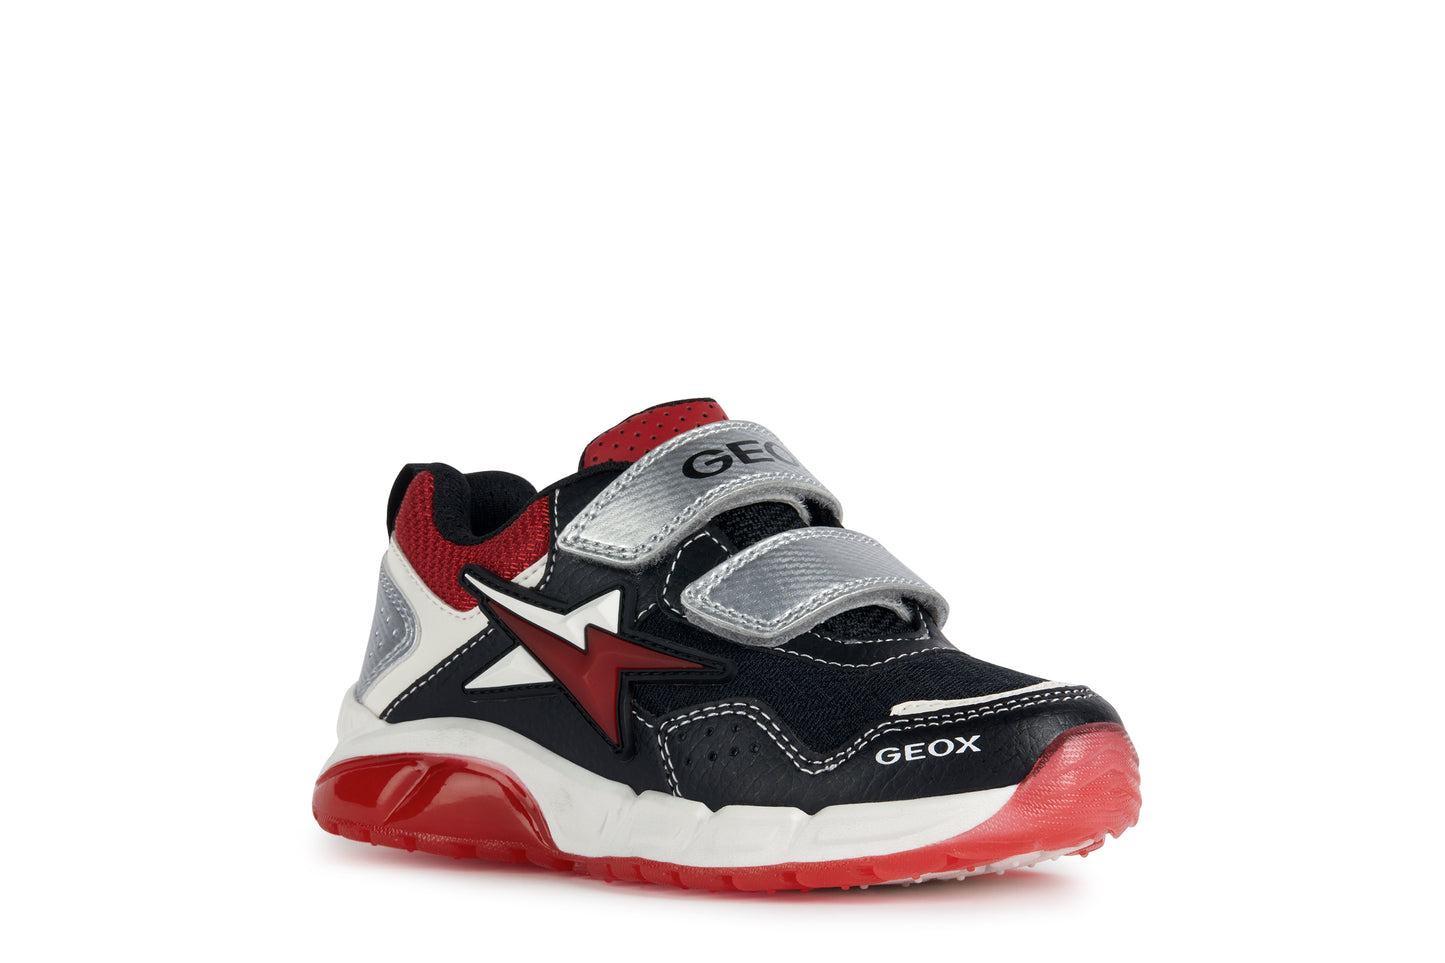 Geox Spaziale Black Red